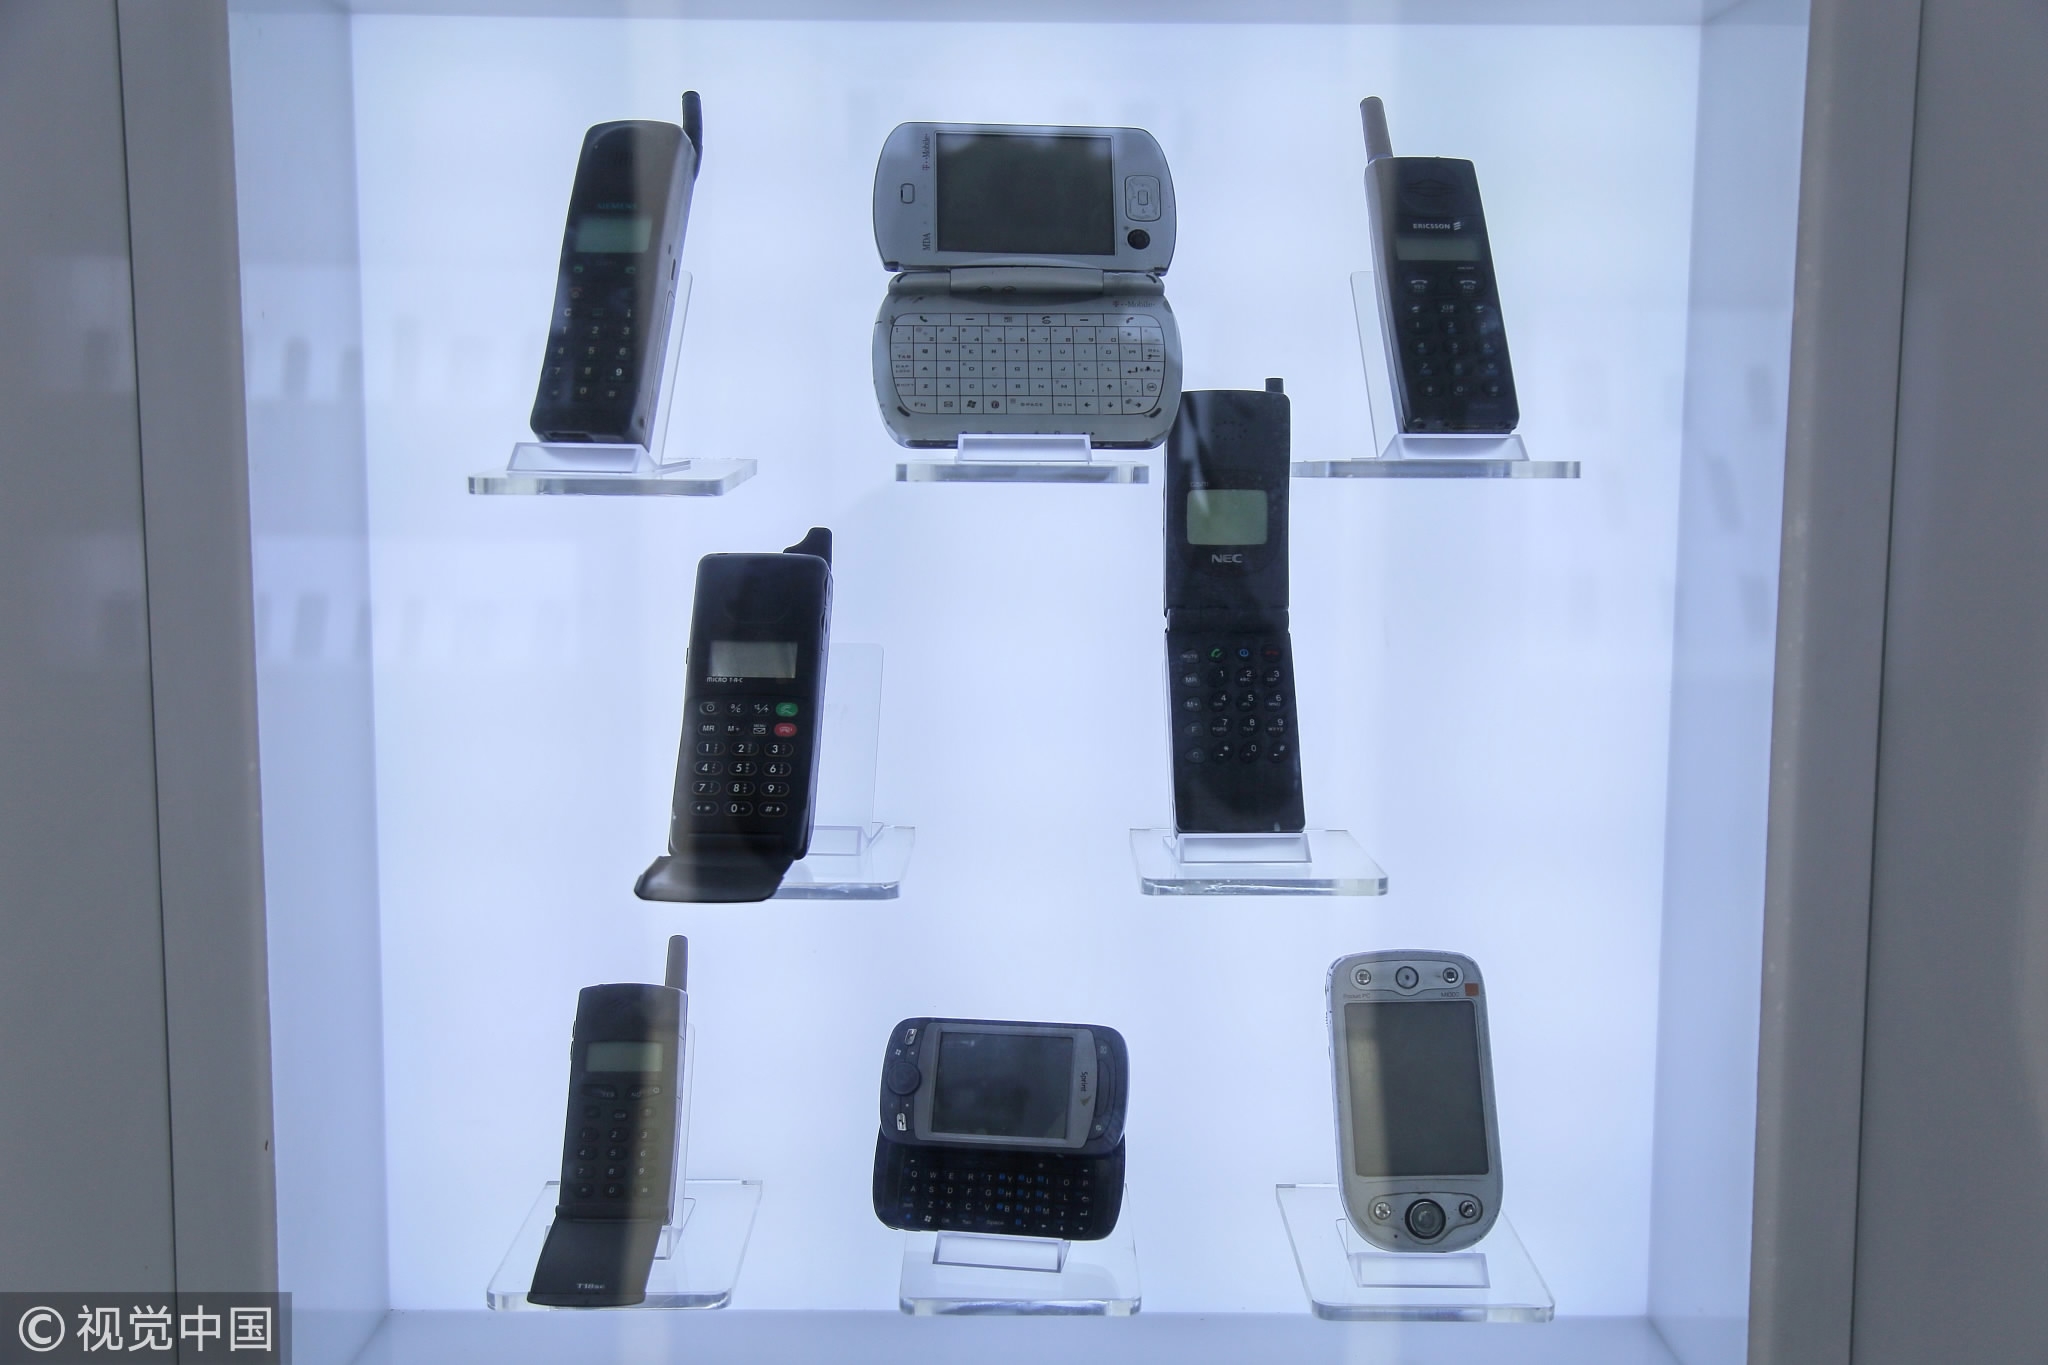 Mobile phones exhibition shows the device’s development over the years